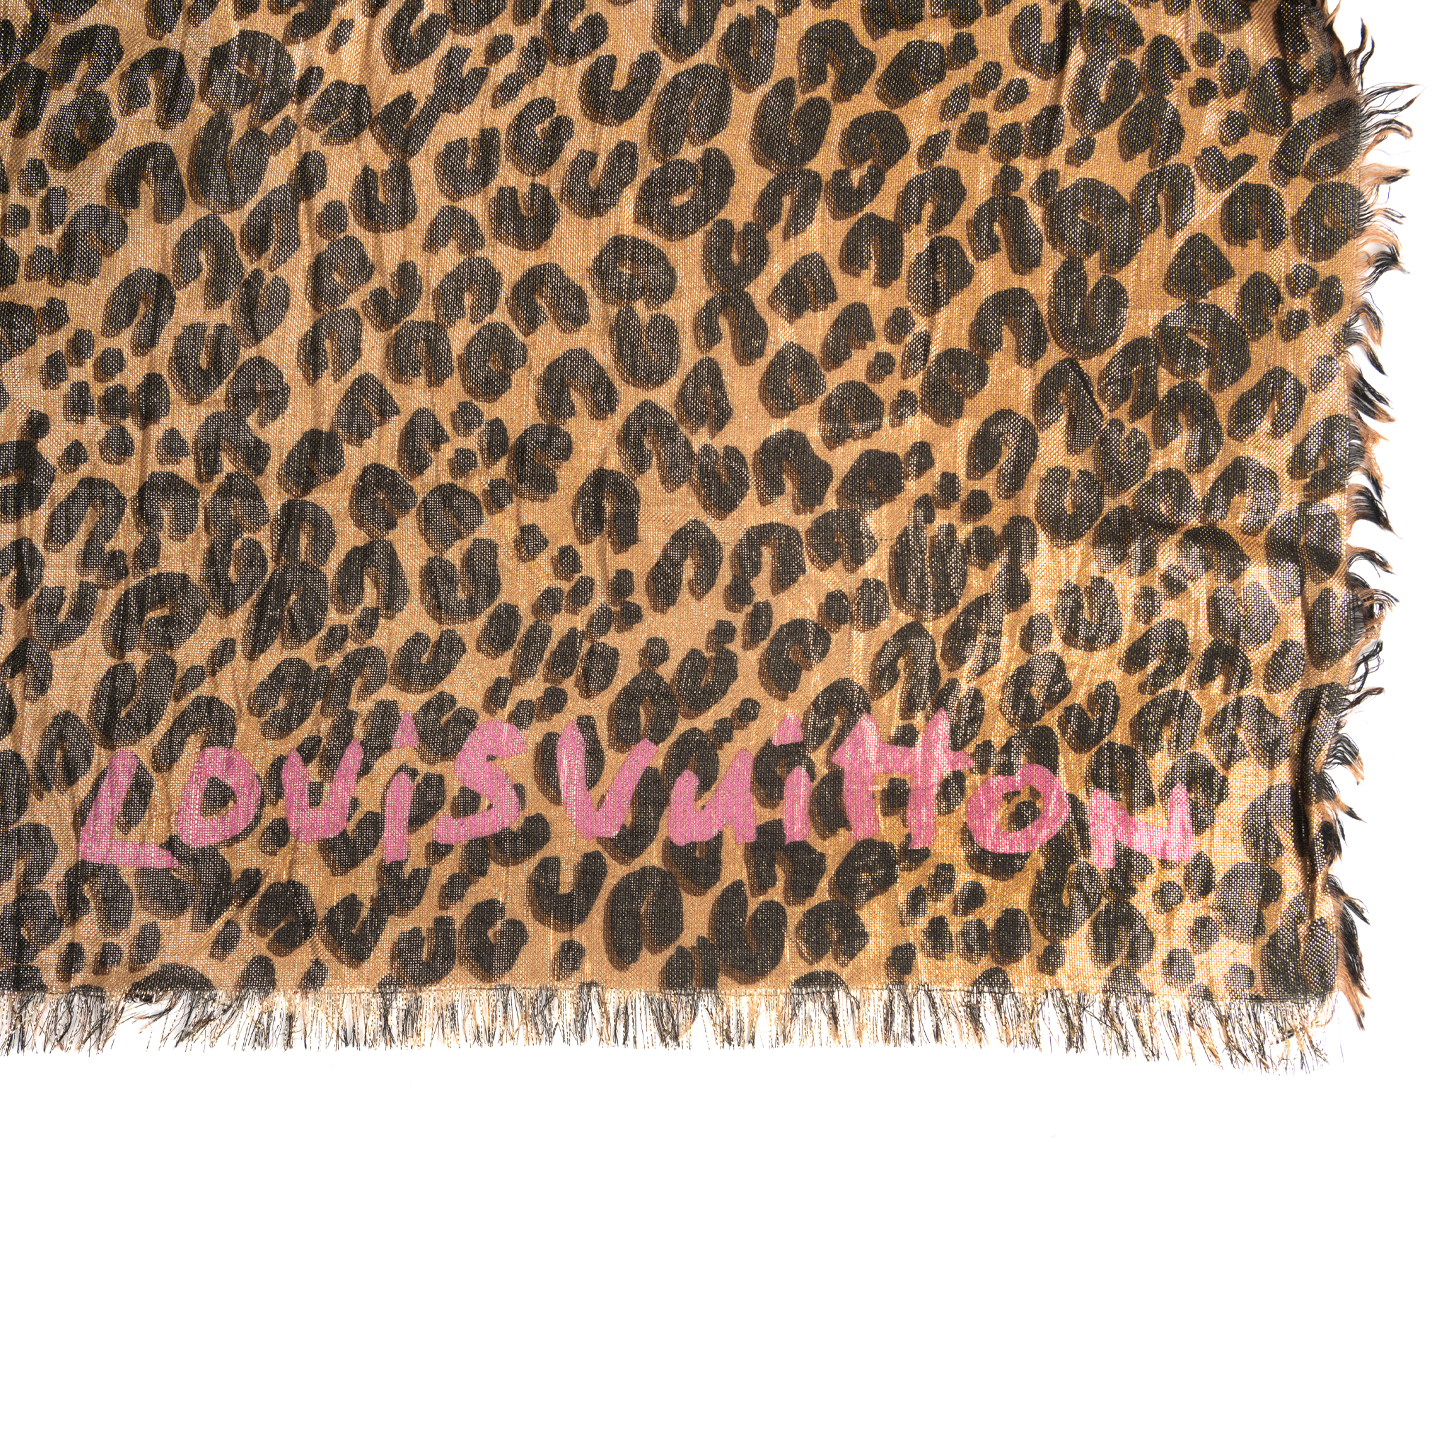 Louis Vuitton Stole Leopard Disco Gold by Stephen Sprouse